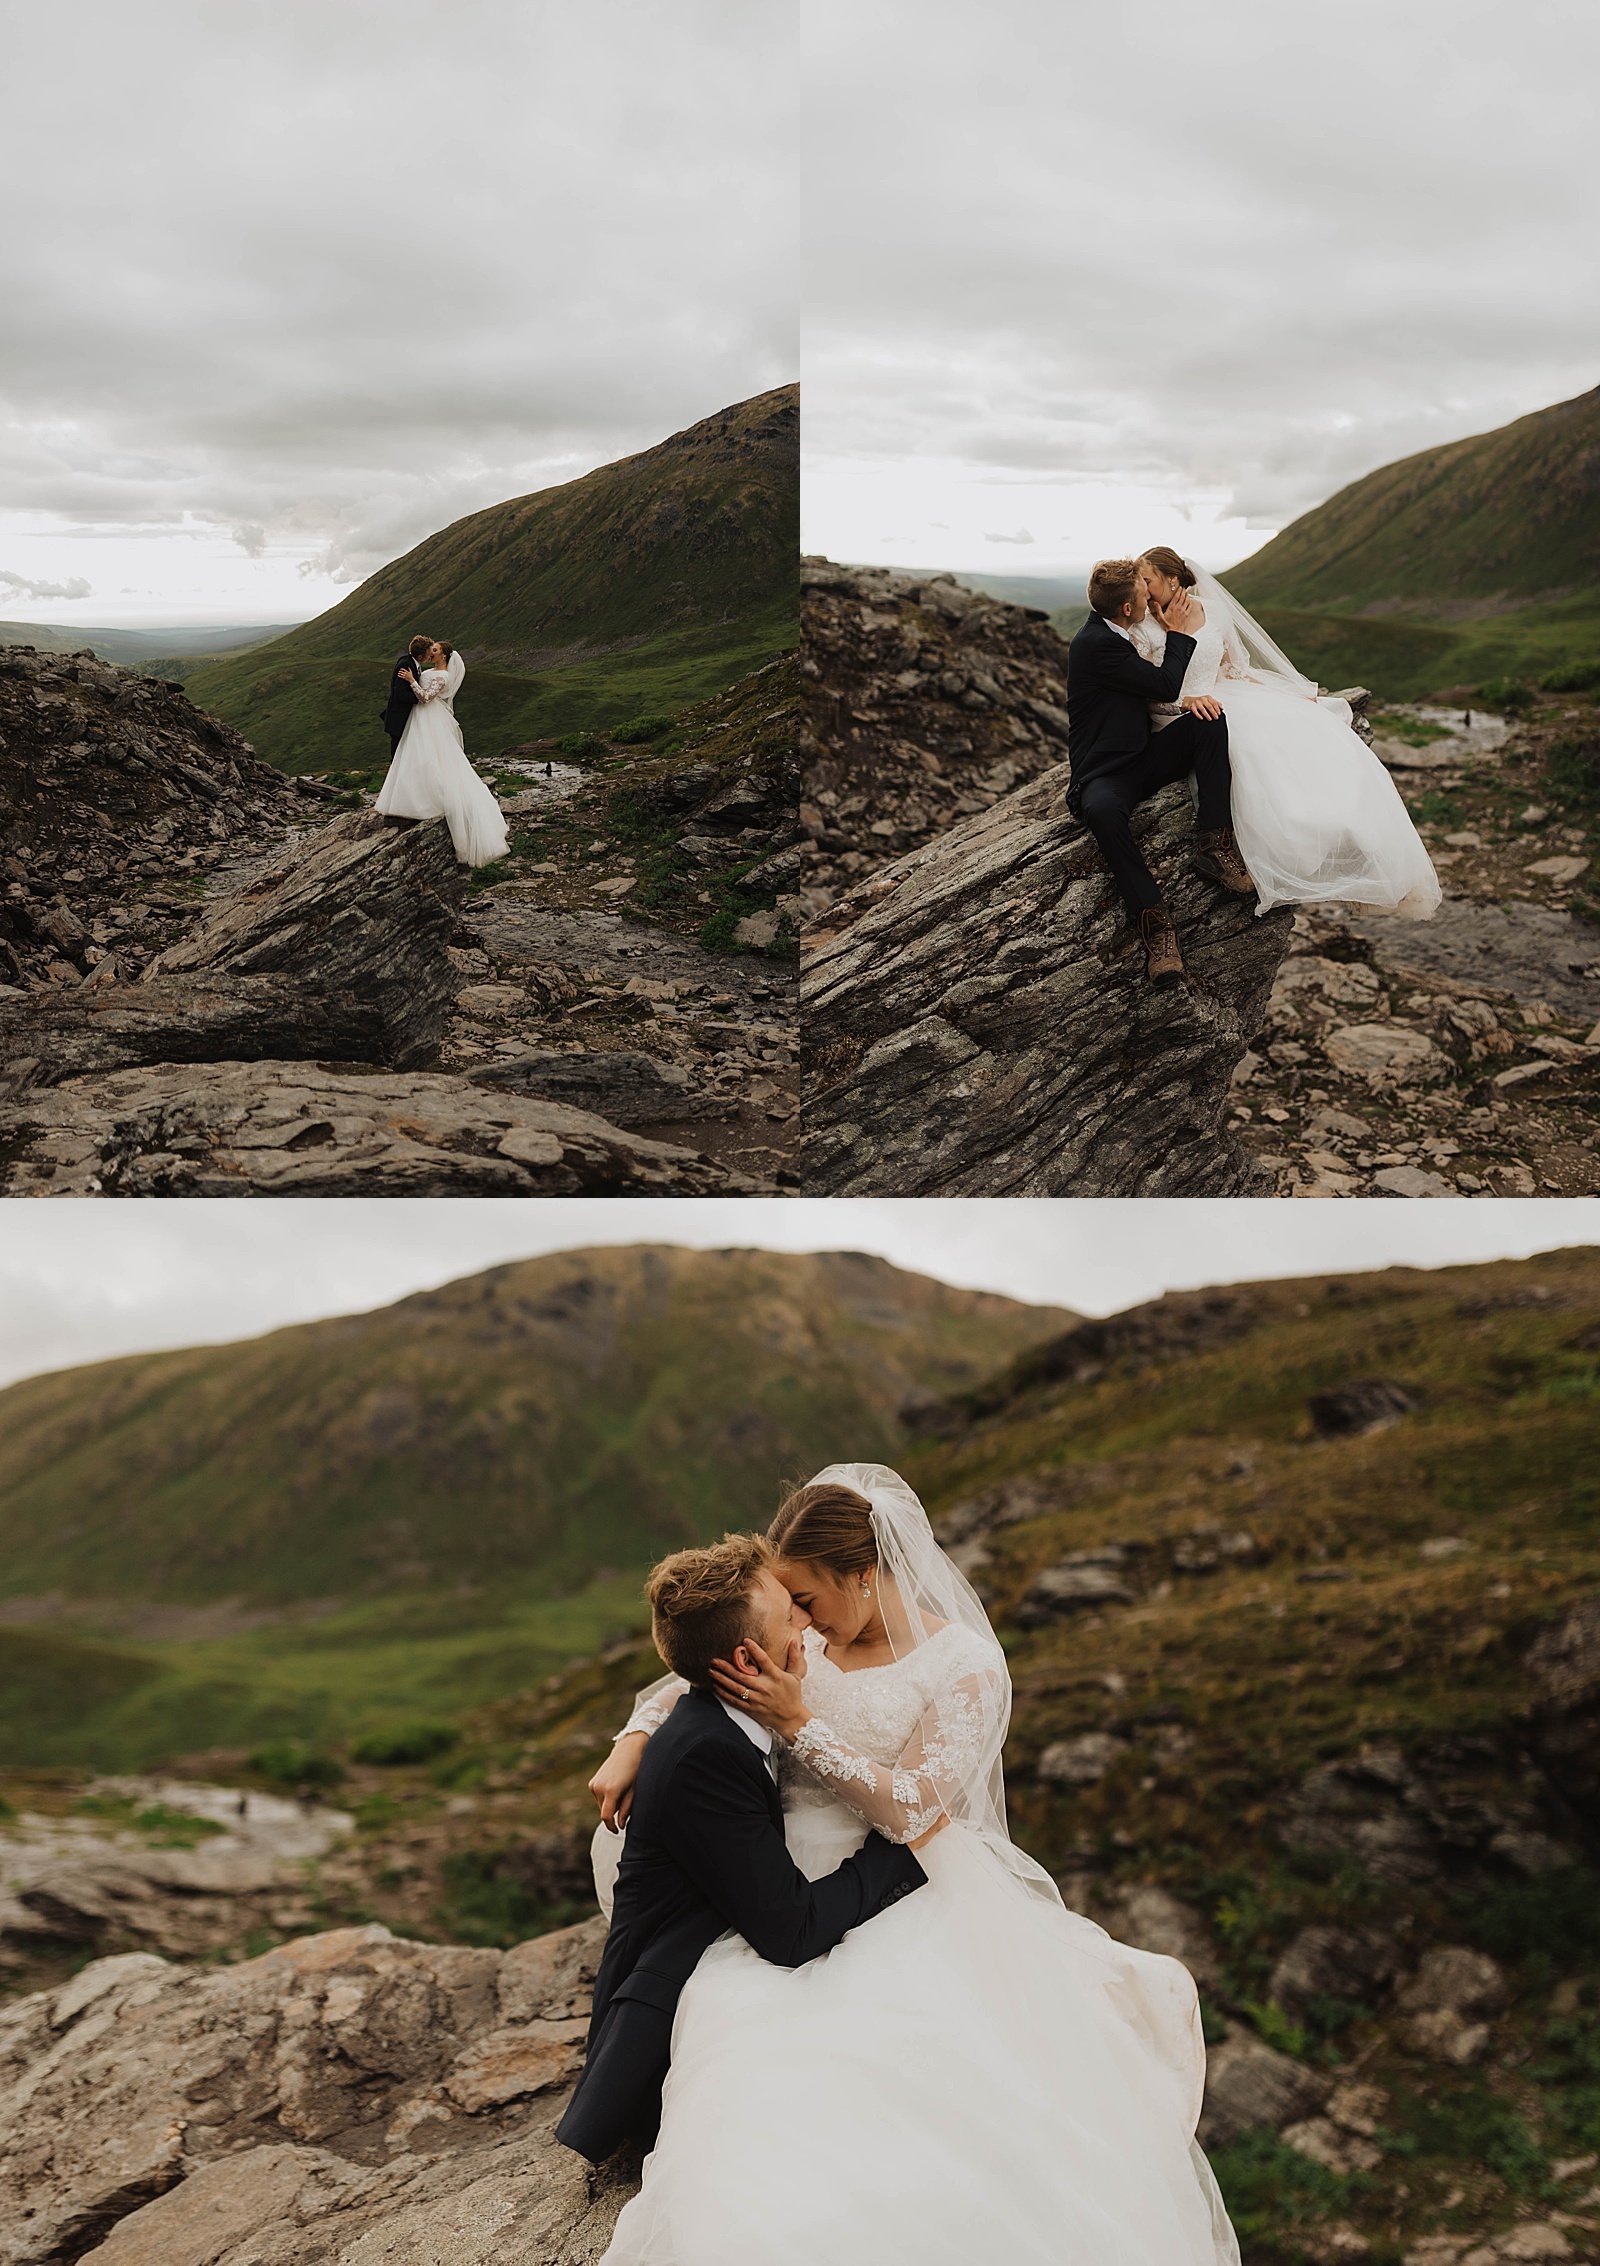  Bride and groom kissing at Hatcher Pass for a bridal photo shoot  